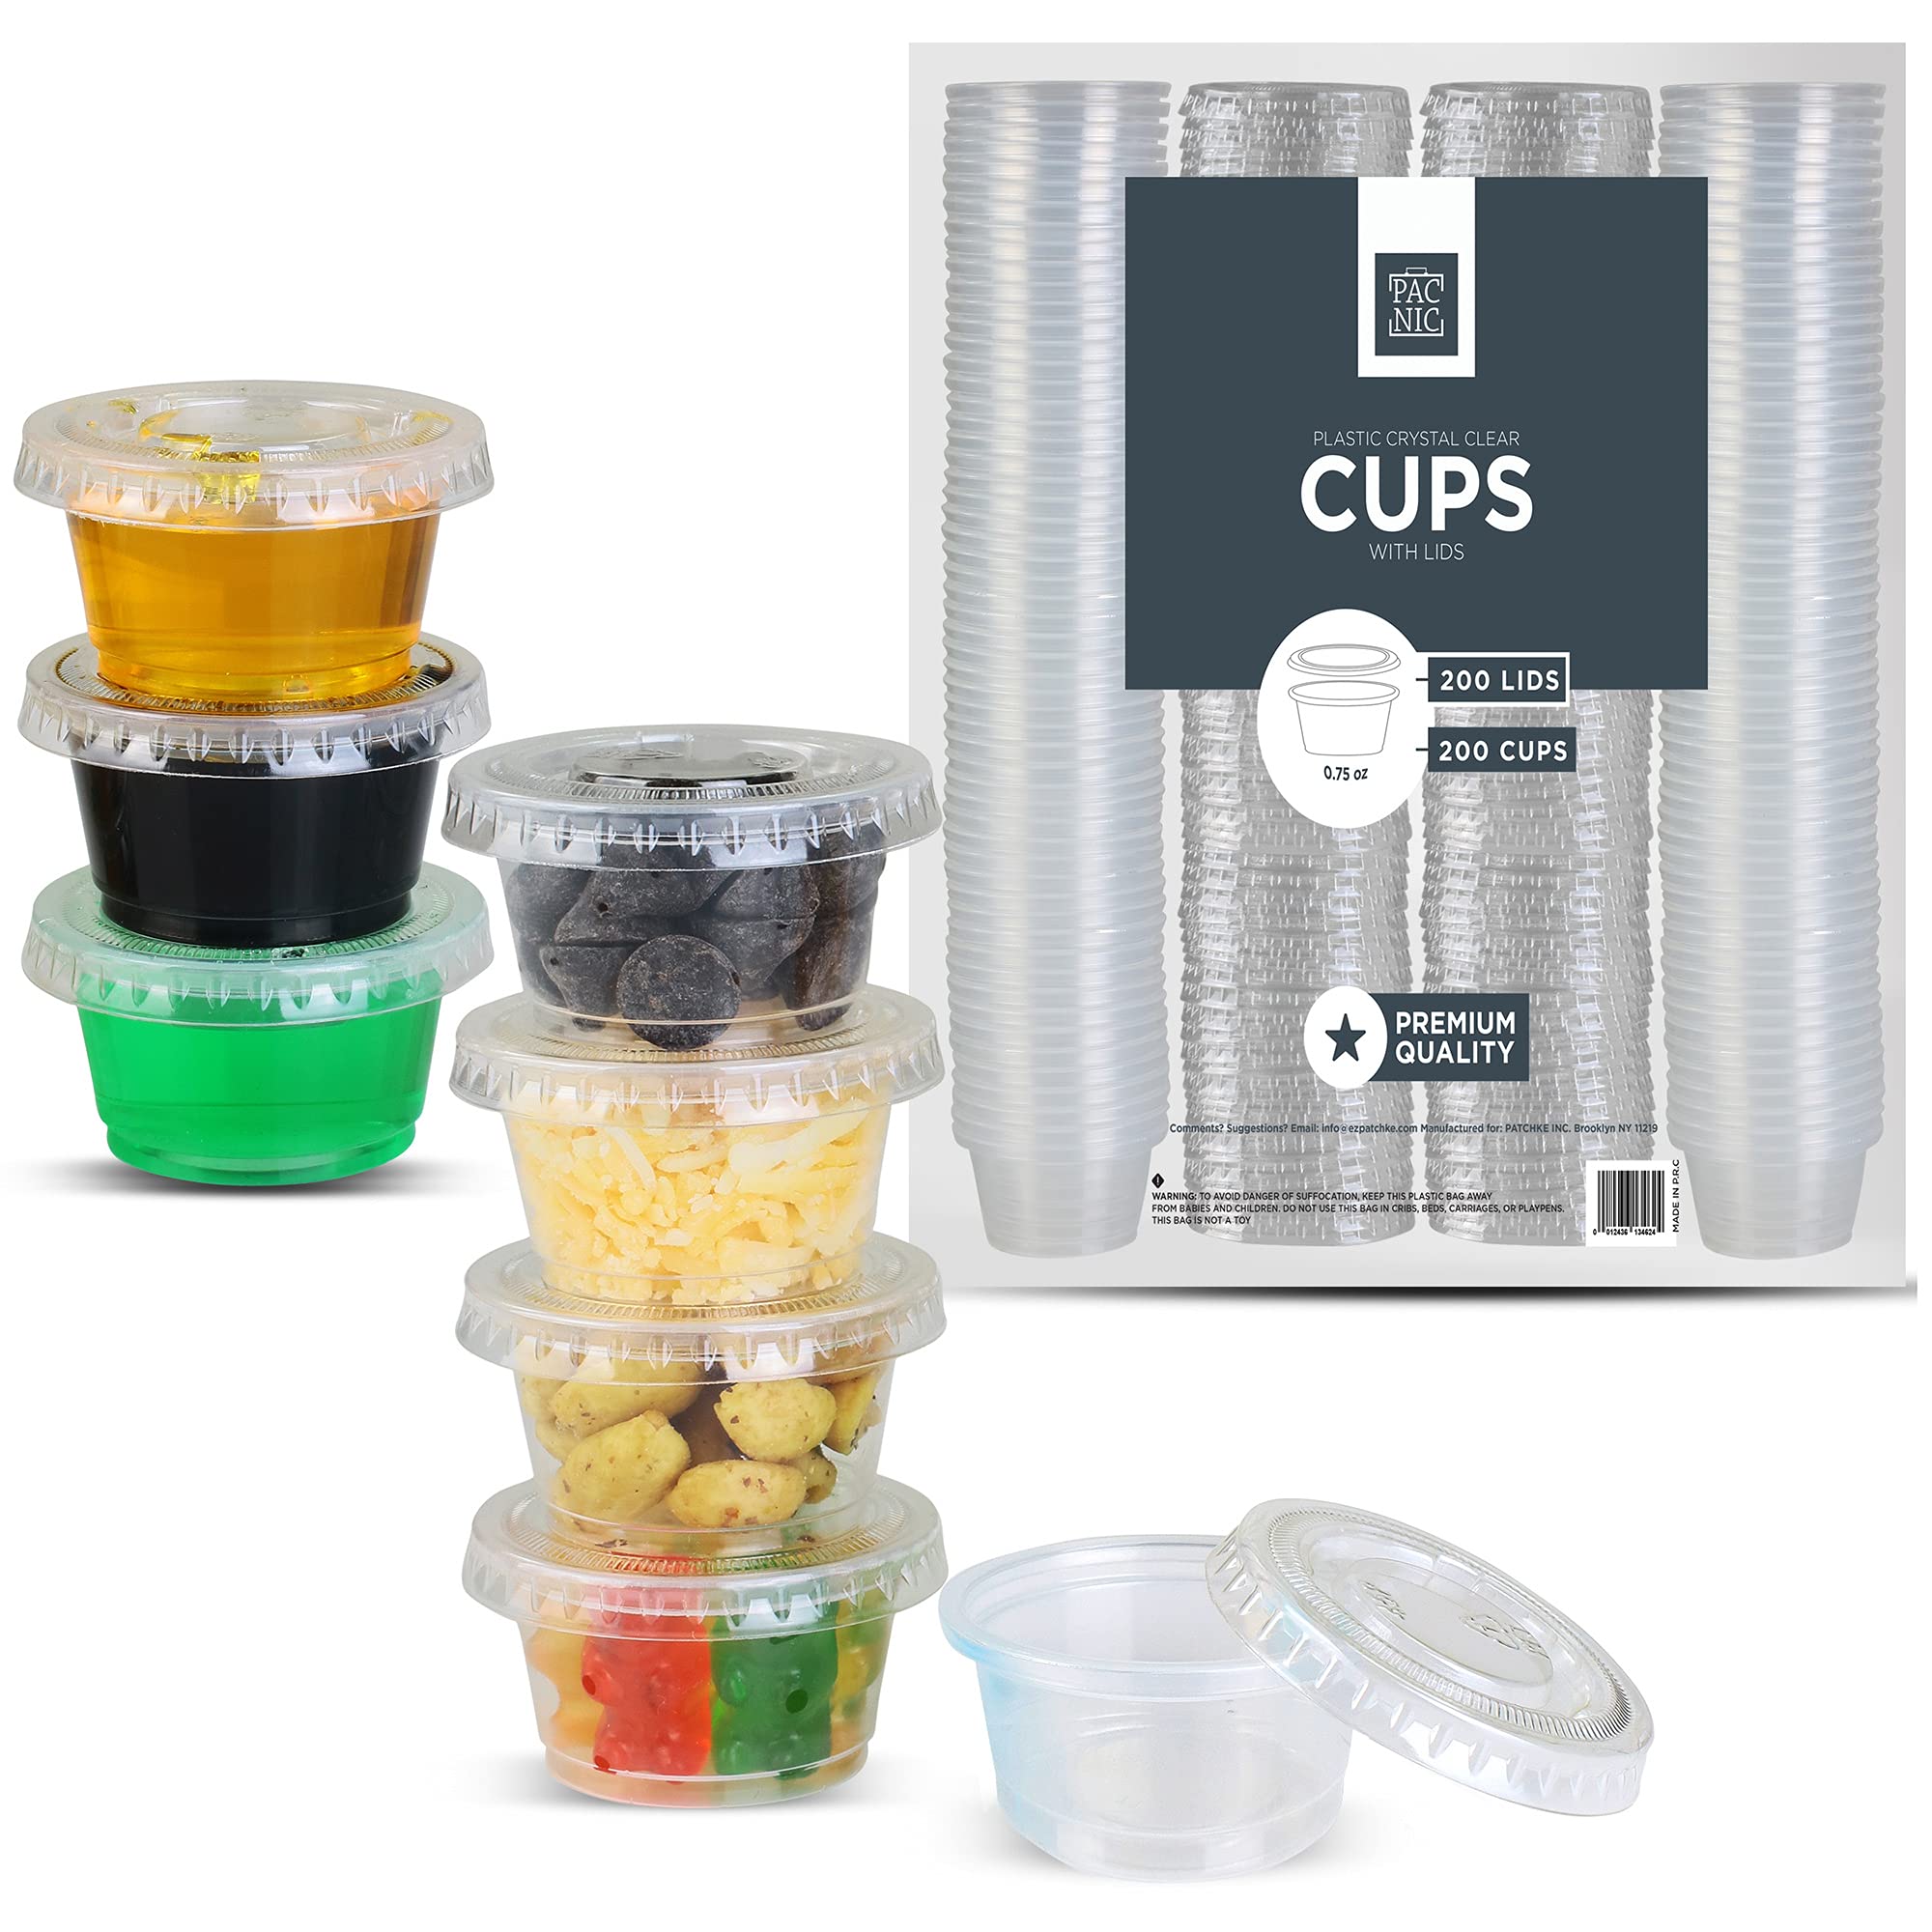 Condiment Cups container with Lids- 8 pk. 5 oz.Salad